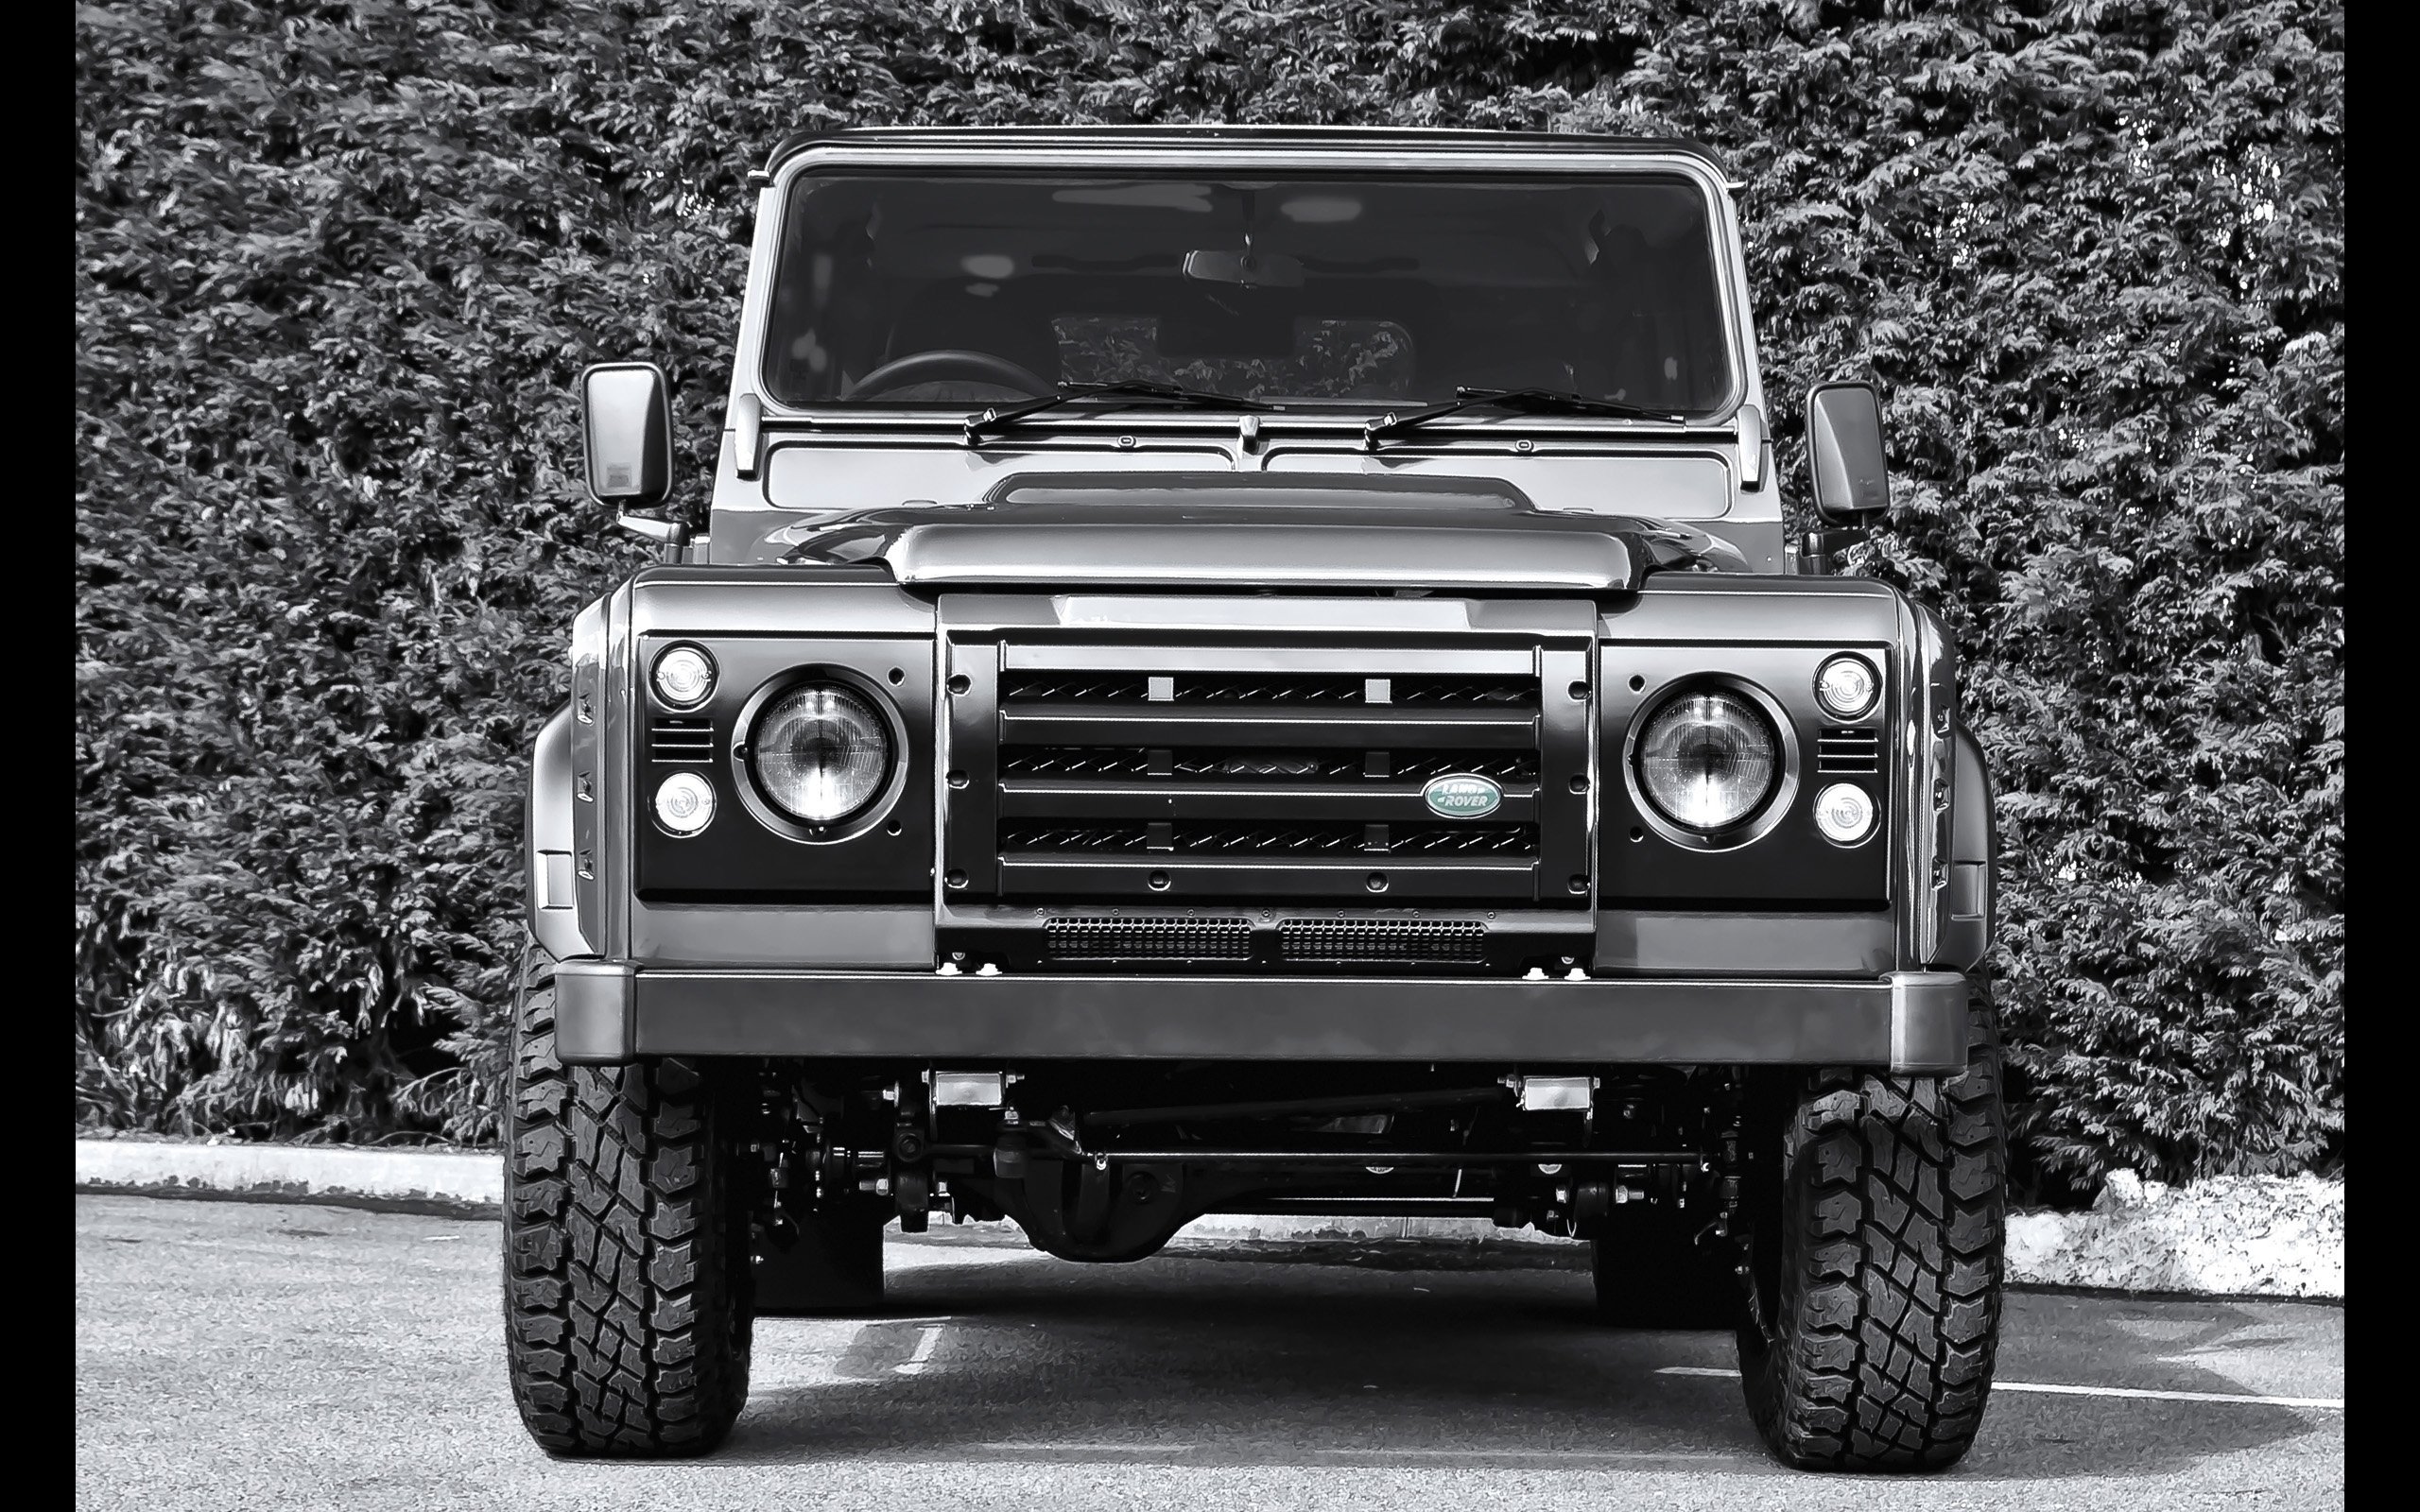 2013, A kahn design, Land, Rover, Chelsea, Wide, Track, Military, Grey, Defender, Tuning, 4x4 Wallpaper